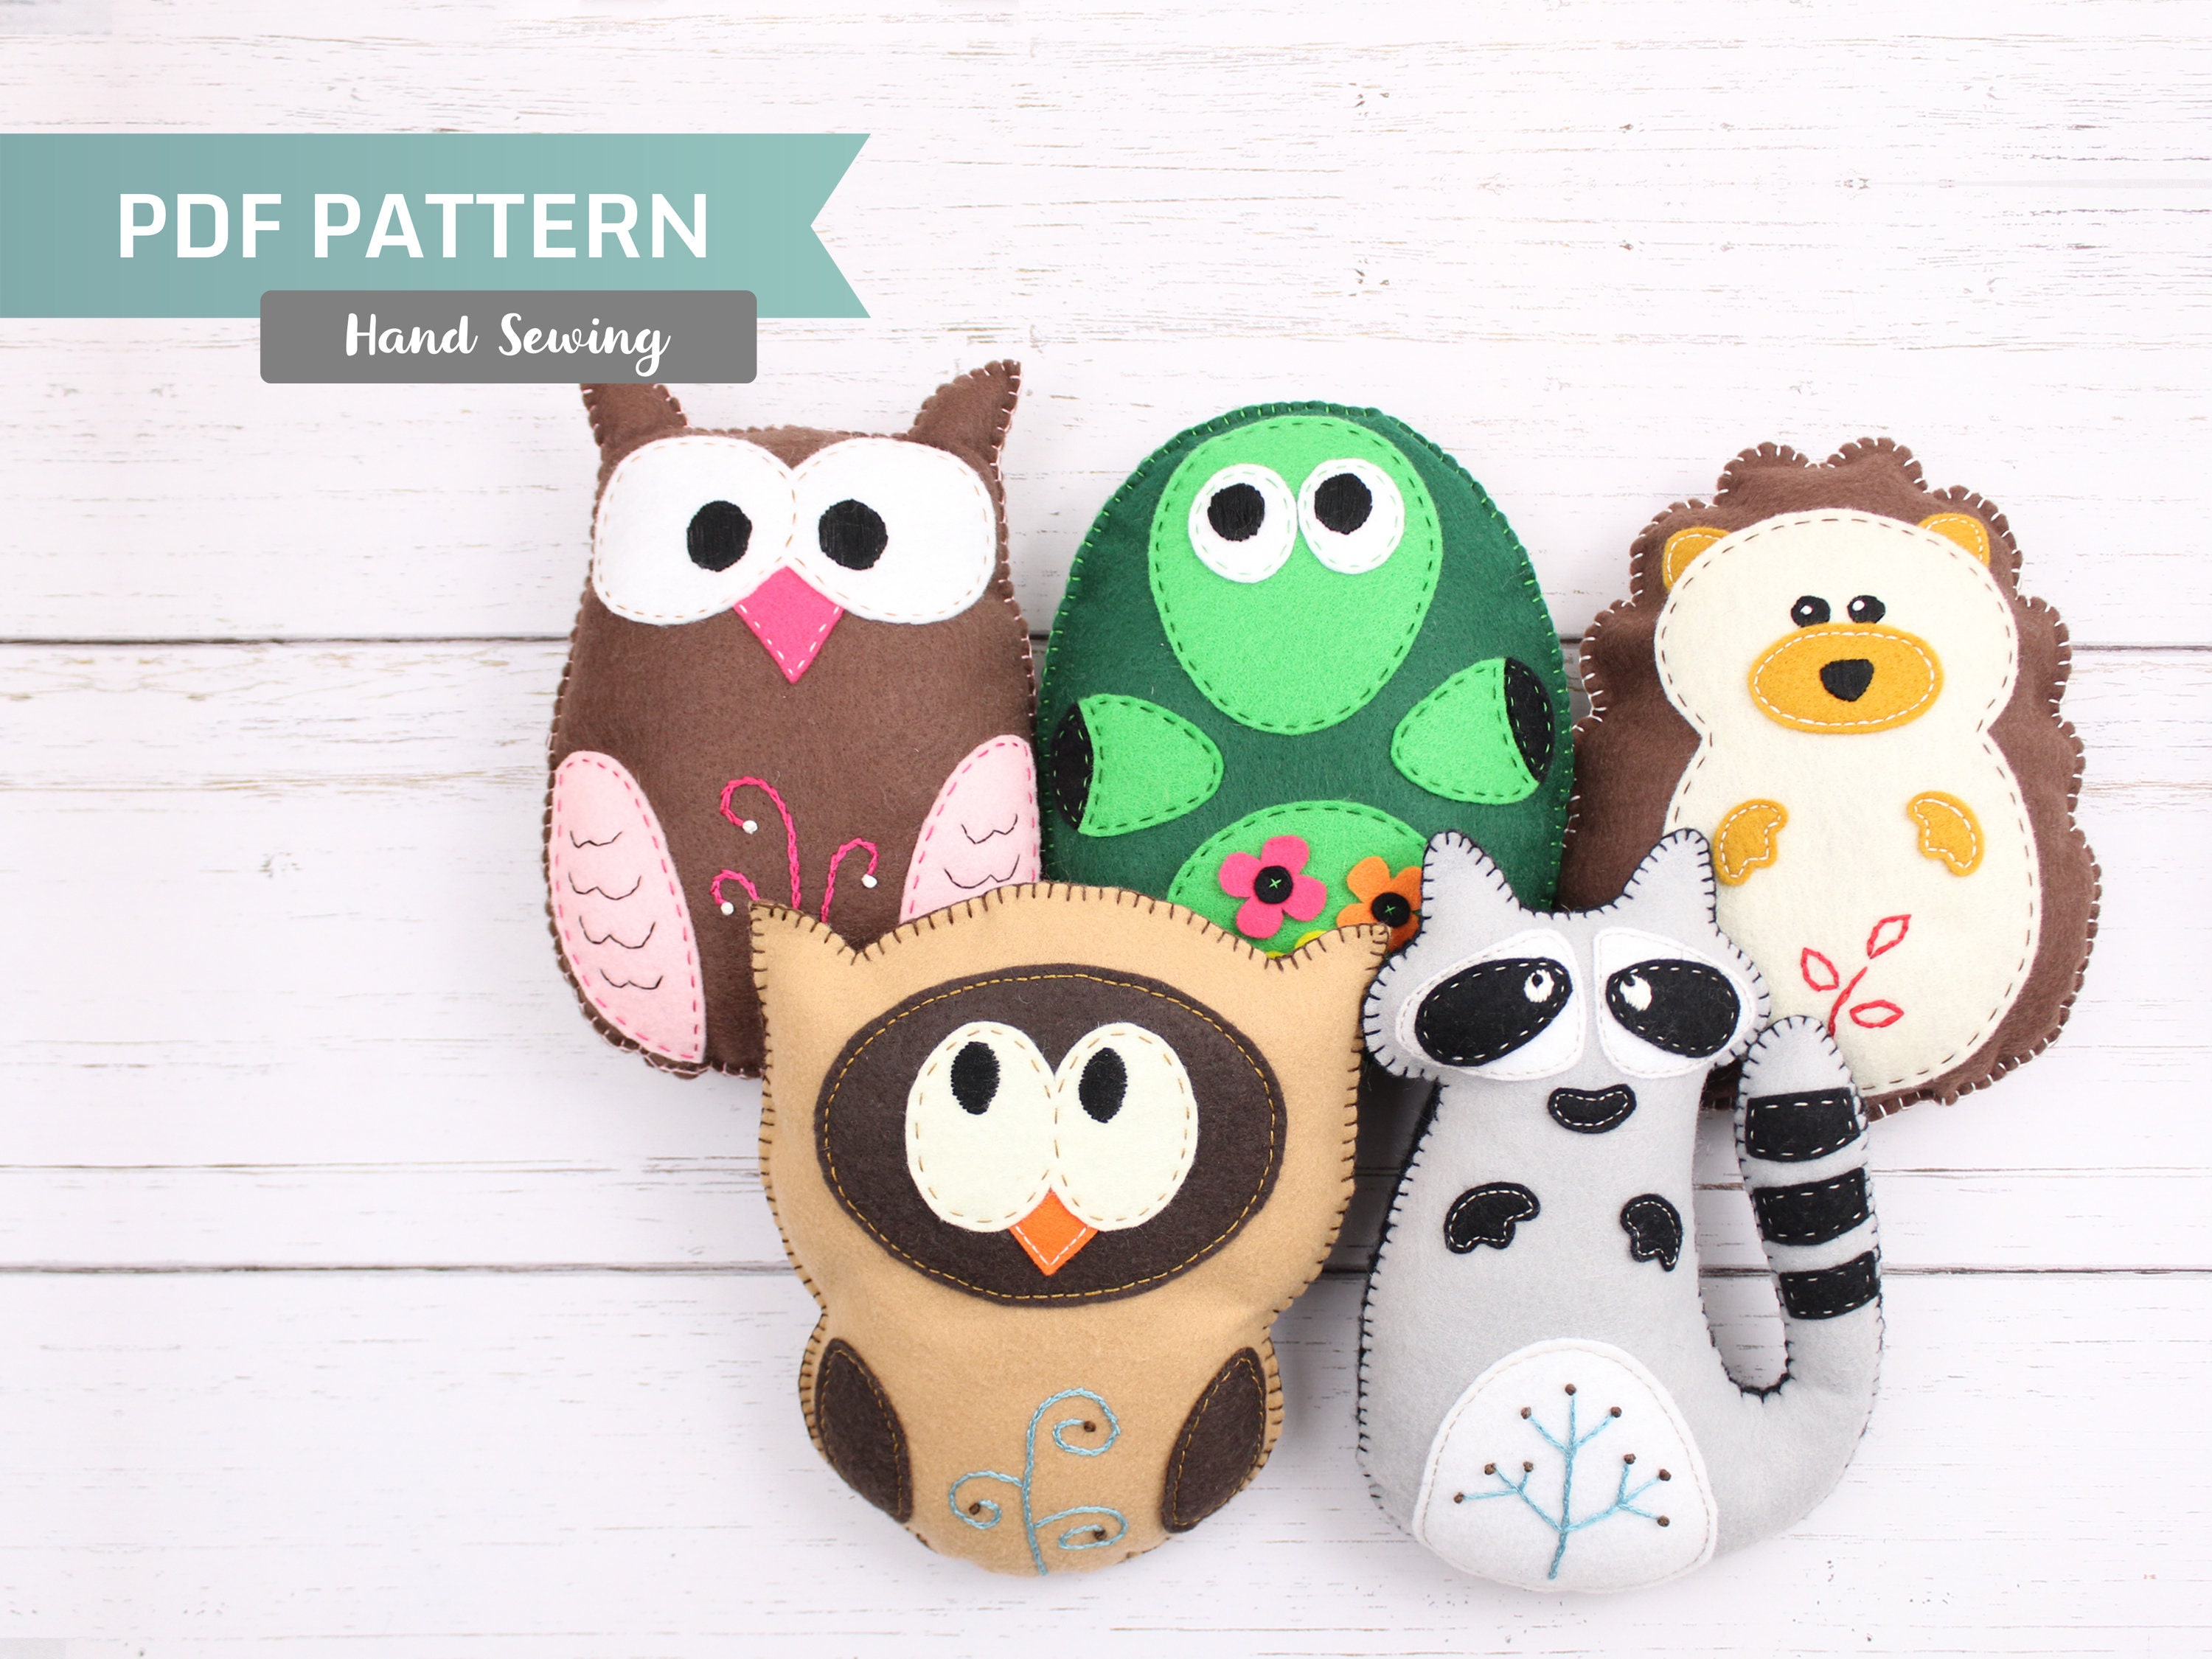 4 NEW Stuffed Animal Sewing Patterns Rabbits Owl Mouse Bunny + Cat Quilt